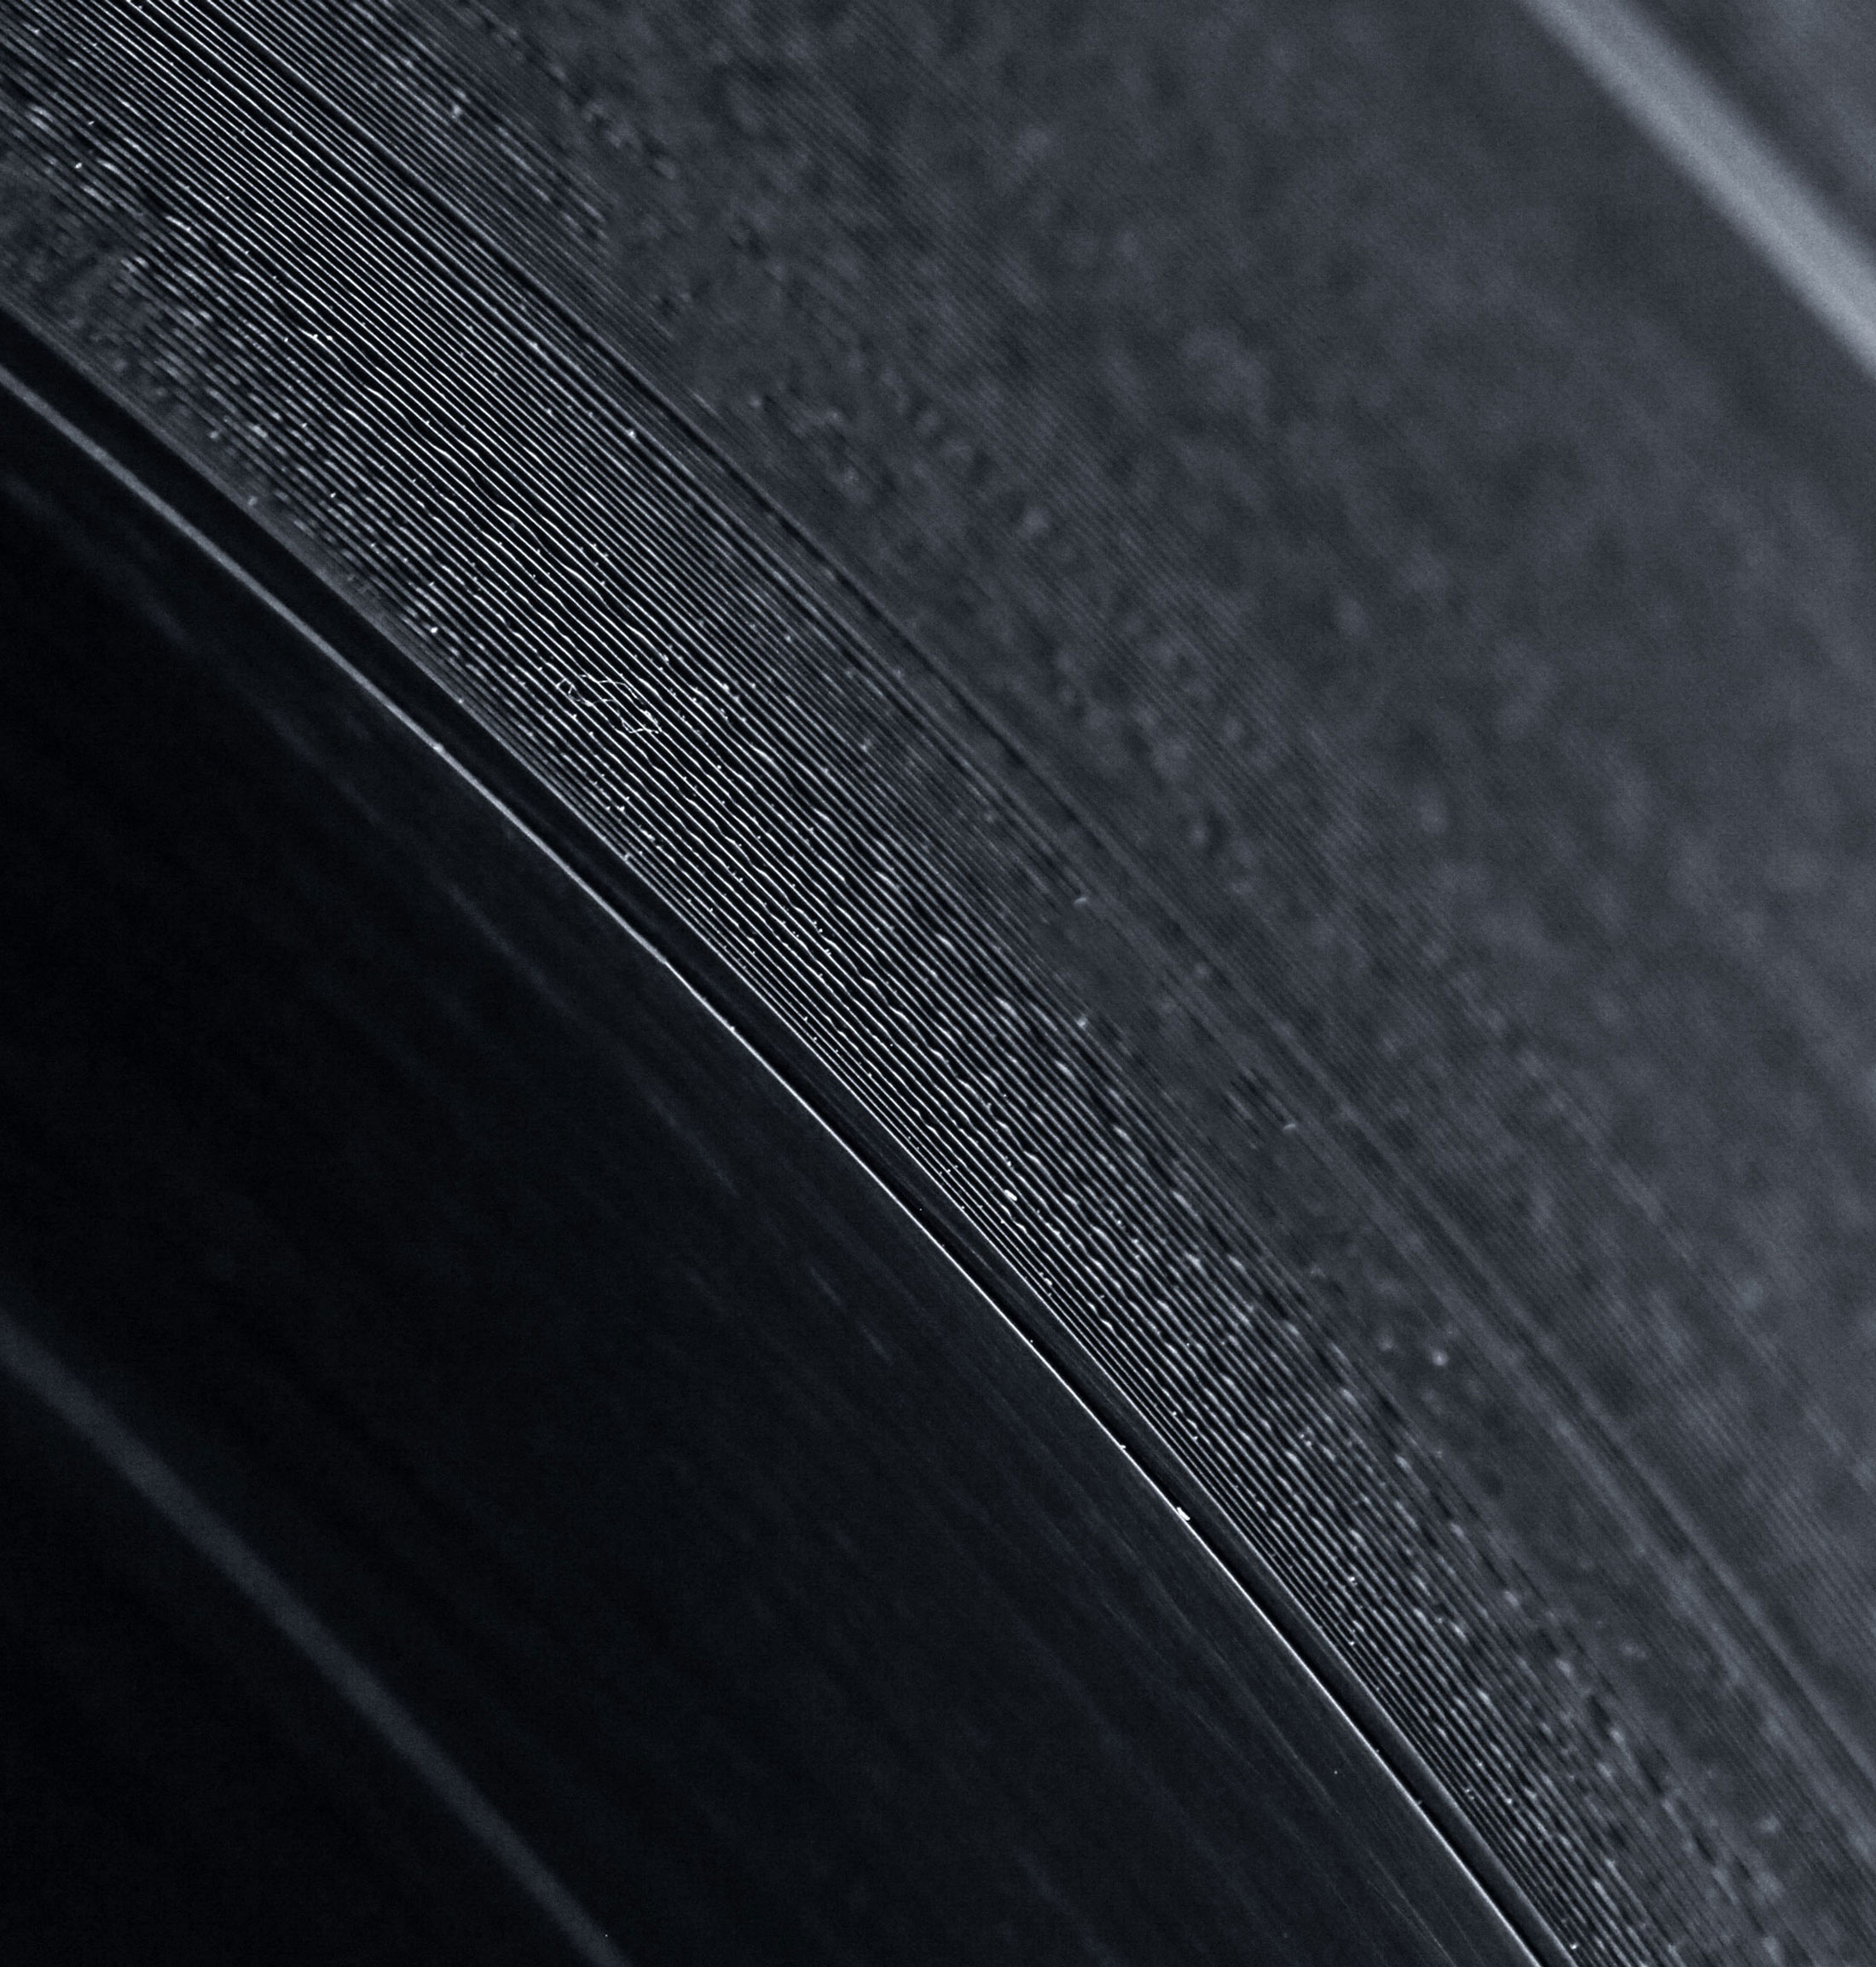 Close up photograph of black vinyl grooves.